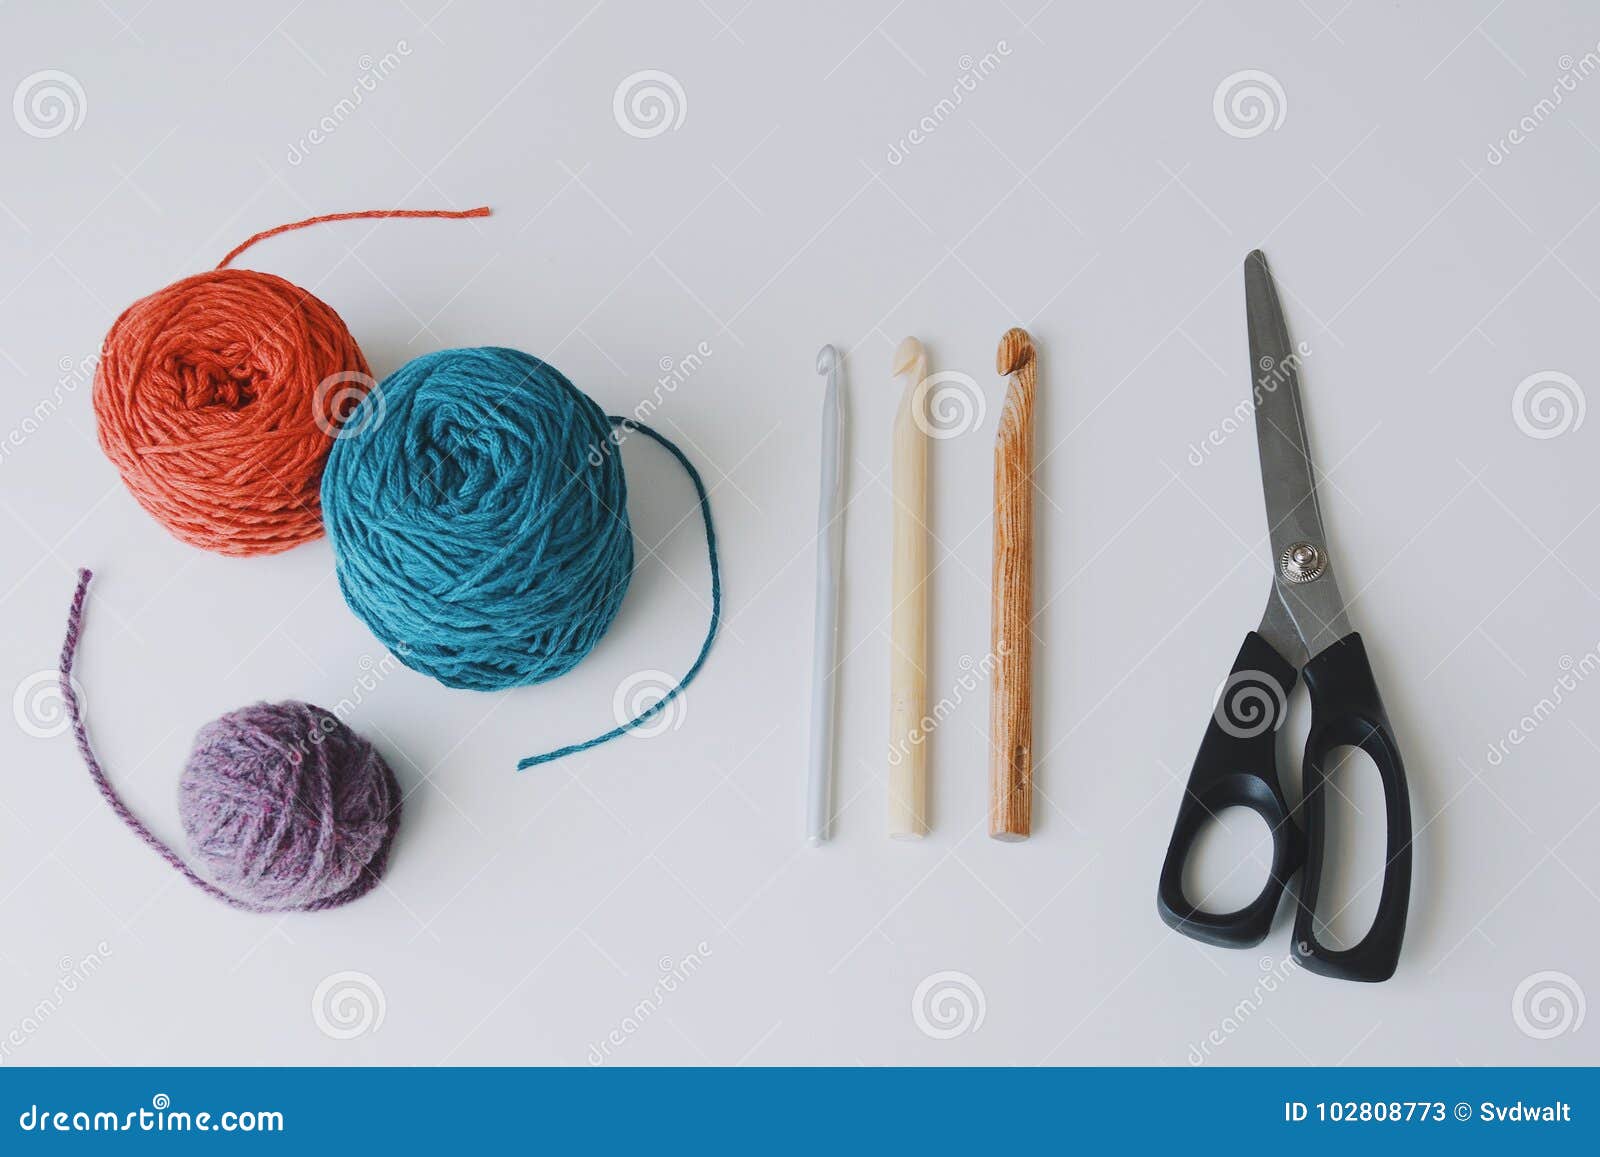 157 Different Crochet Hooks Stock Photos - Free & Royalty-Free Stock Photos  from Dreamstime